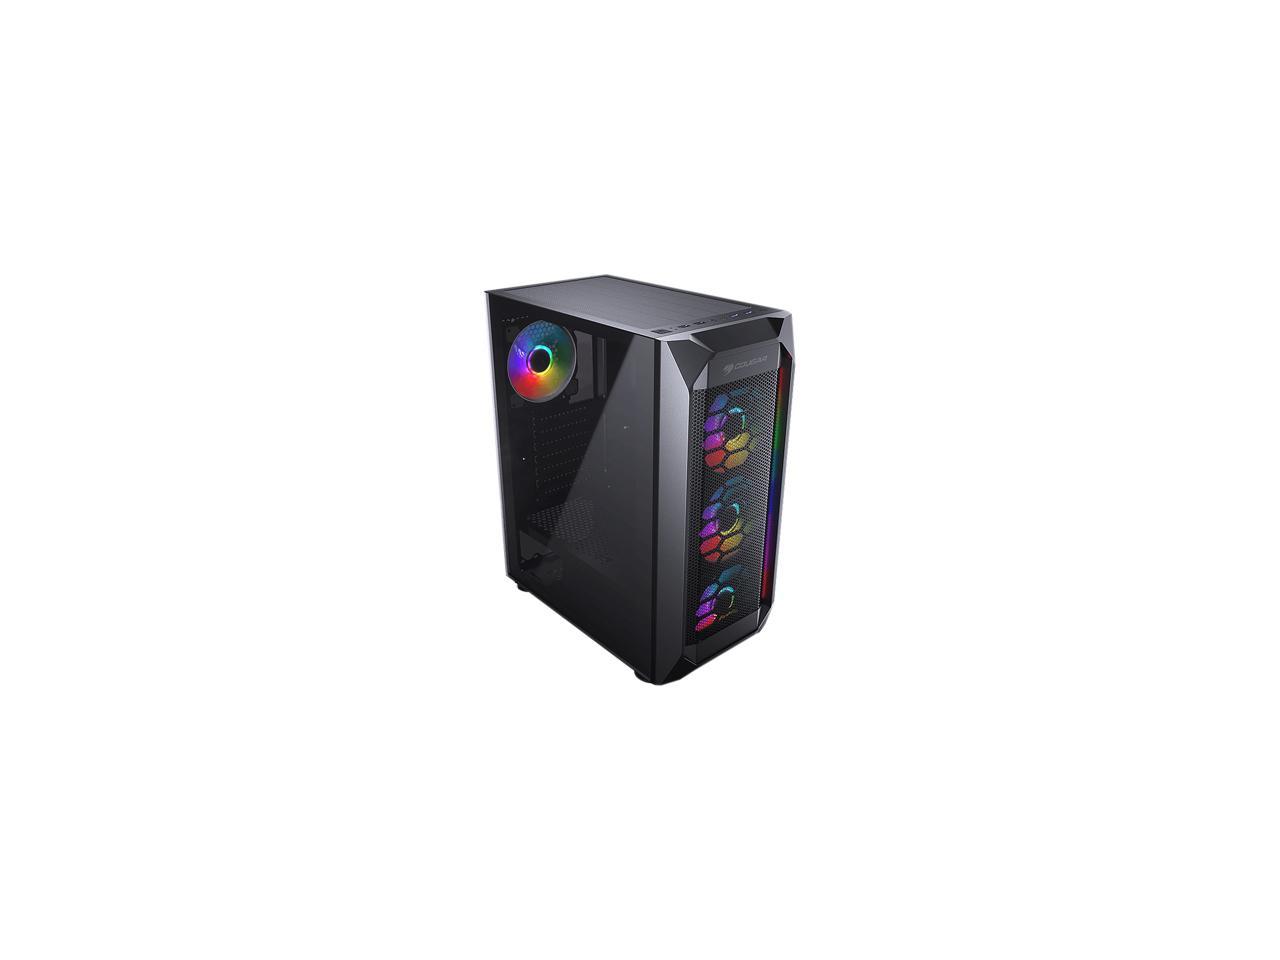 COUGAR MX410 Mesh-G RGB Black ATX Mid Tower Powerful and Compact Mid-Tower Case with Mesh Front Panel and Tempered Glass Built-in 4 RGB Fan